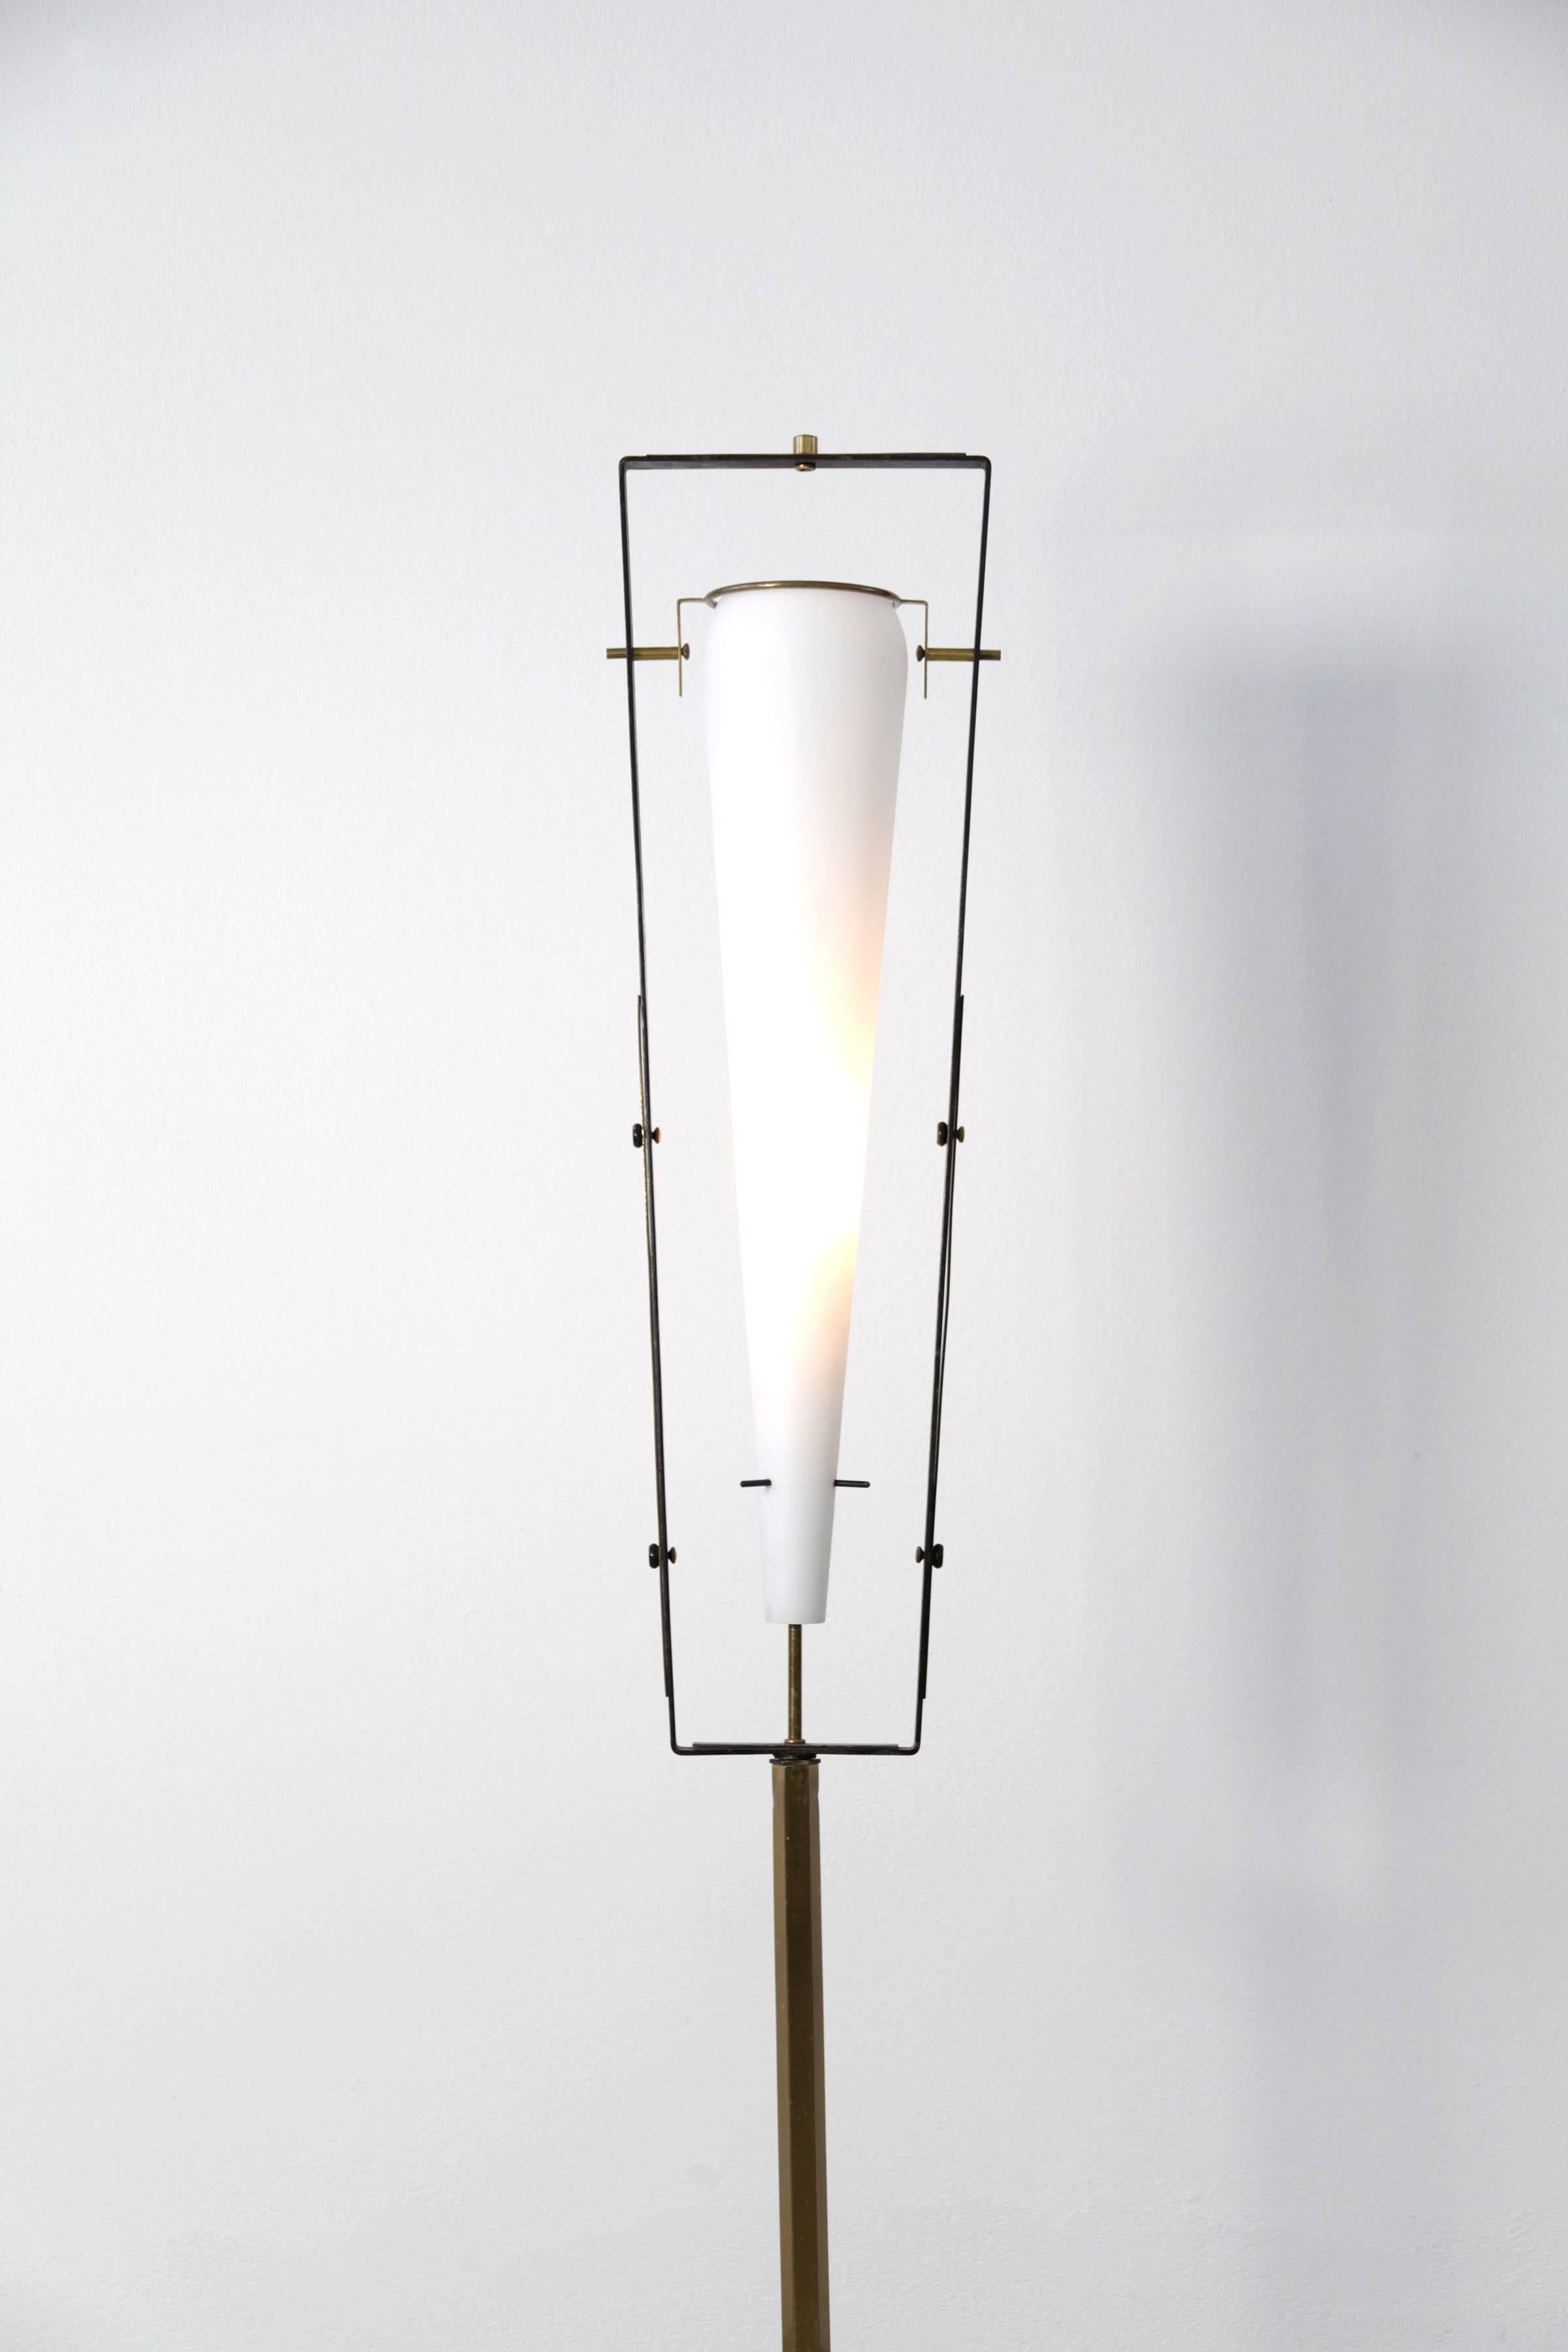 Mid-20th Century Gilardi & Barzaghi Italian Floor Brass Lamp with Satinated Glass Shade, 1950s For Sale